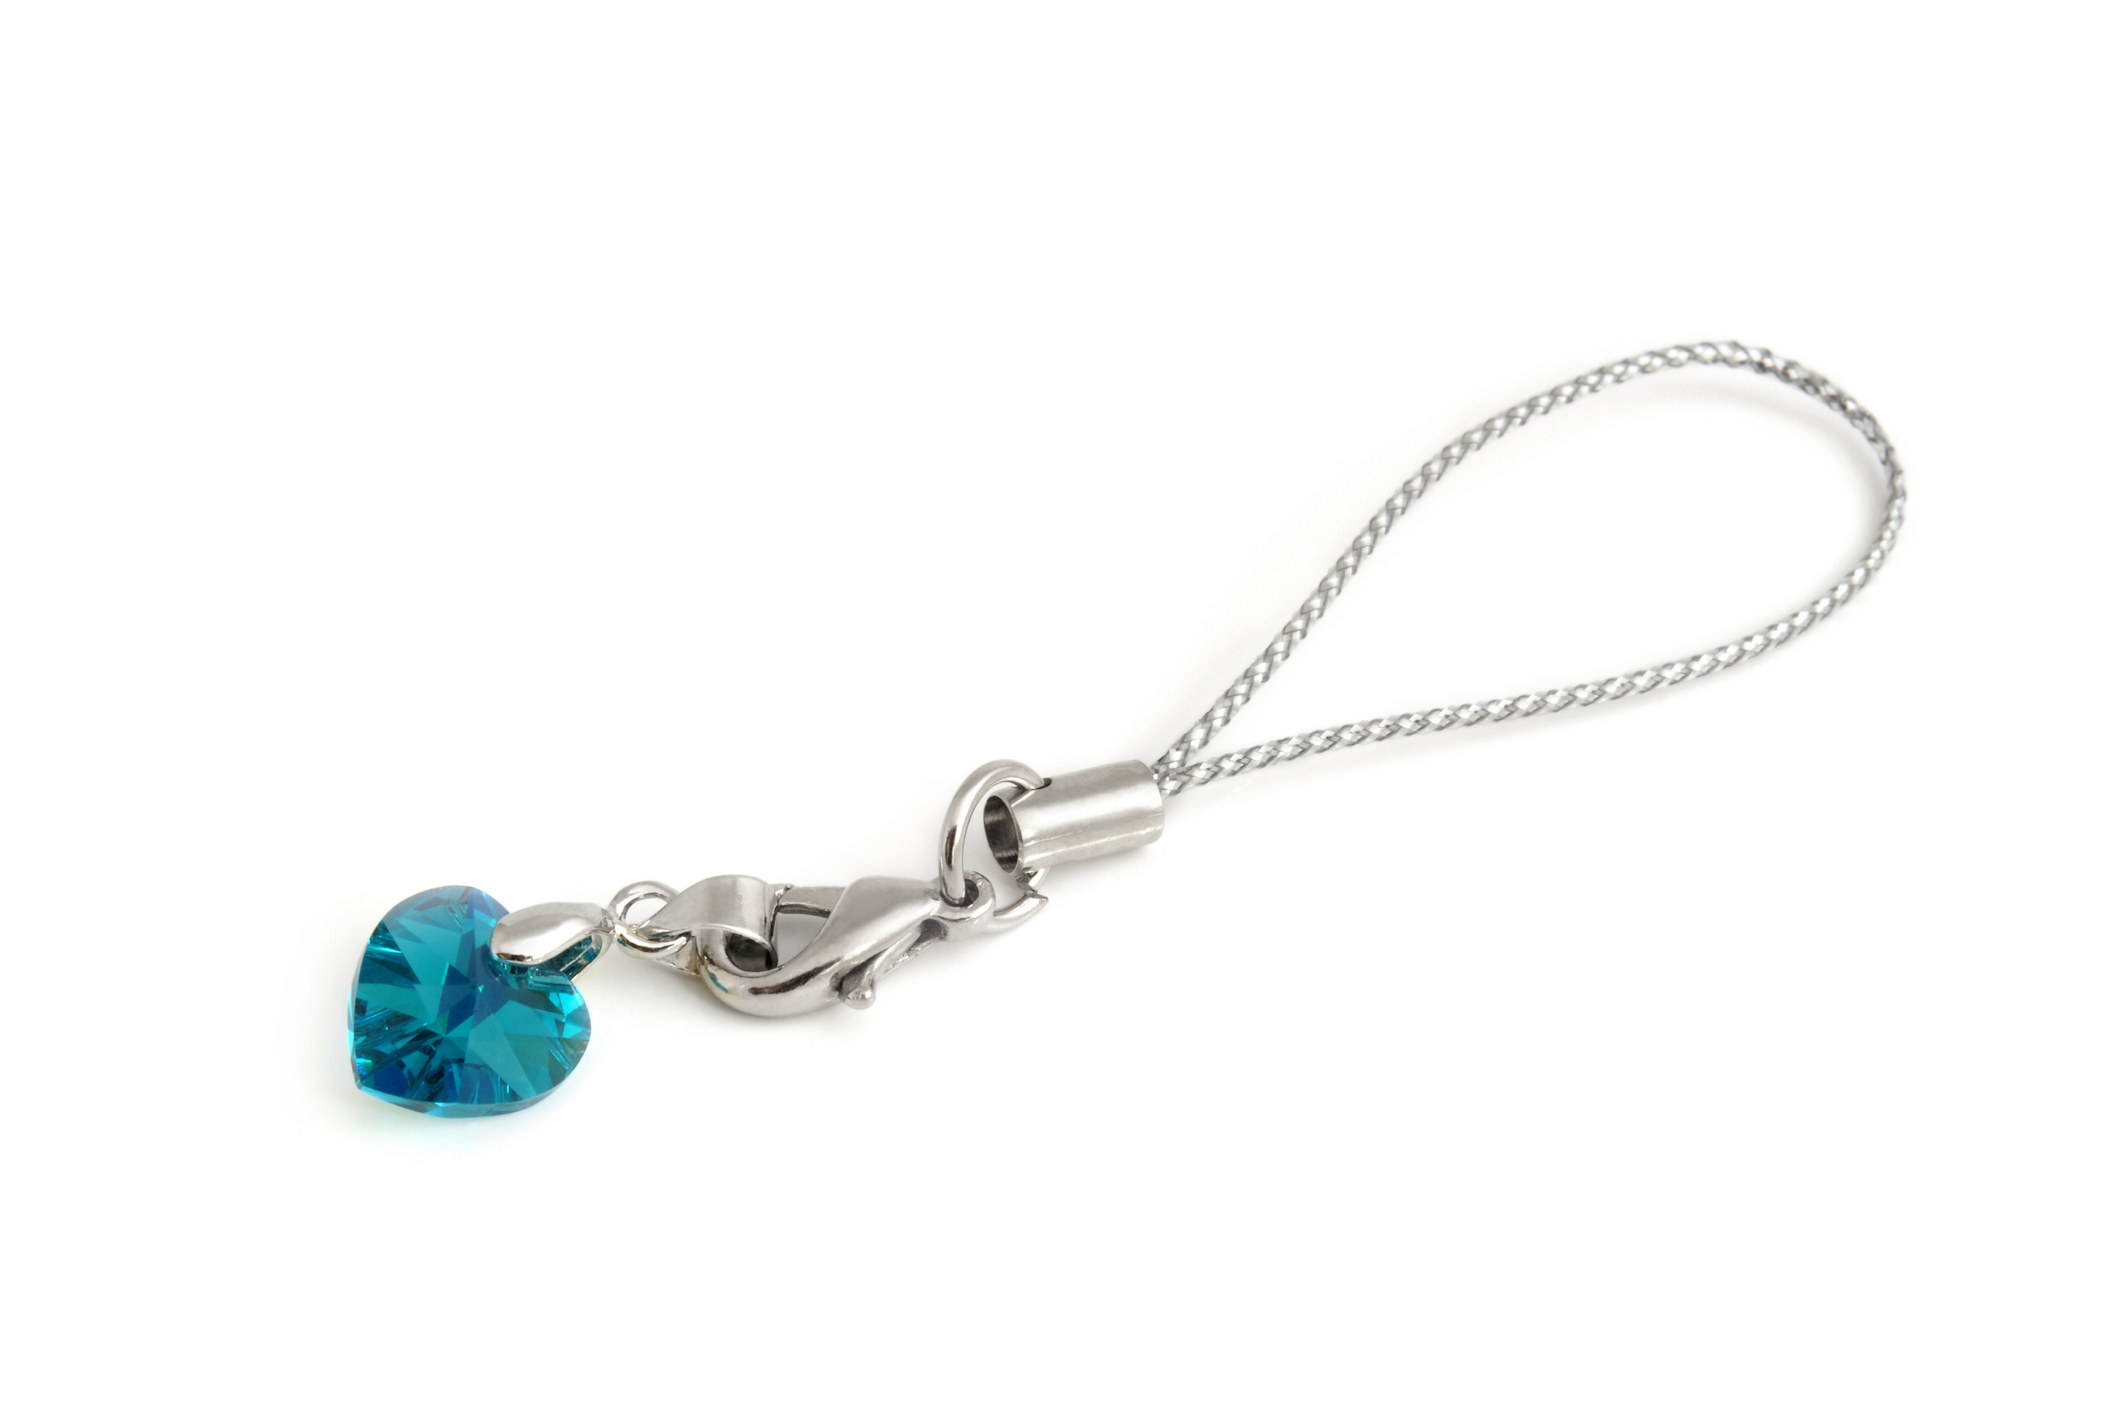 A silver cellphone loop charm with a blue heart charm